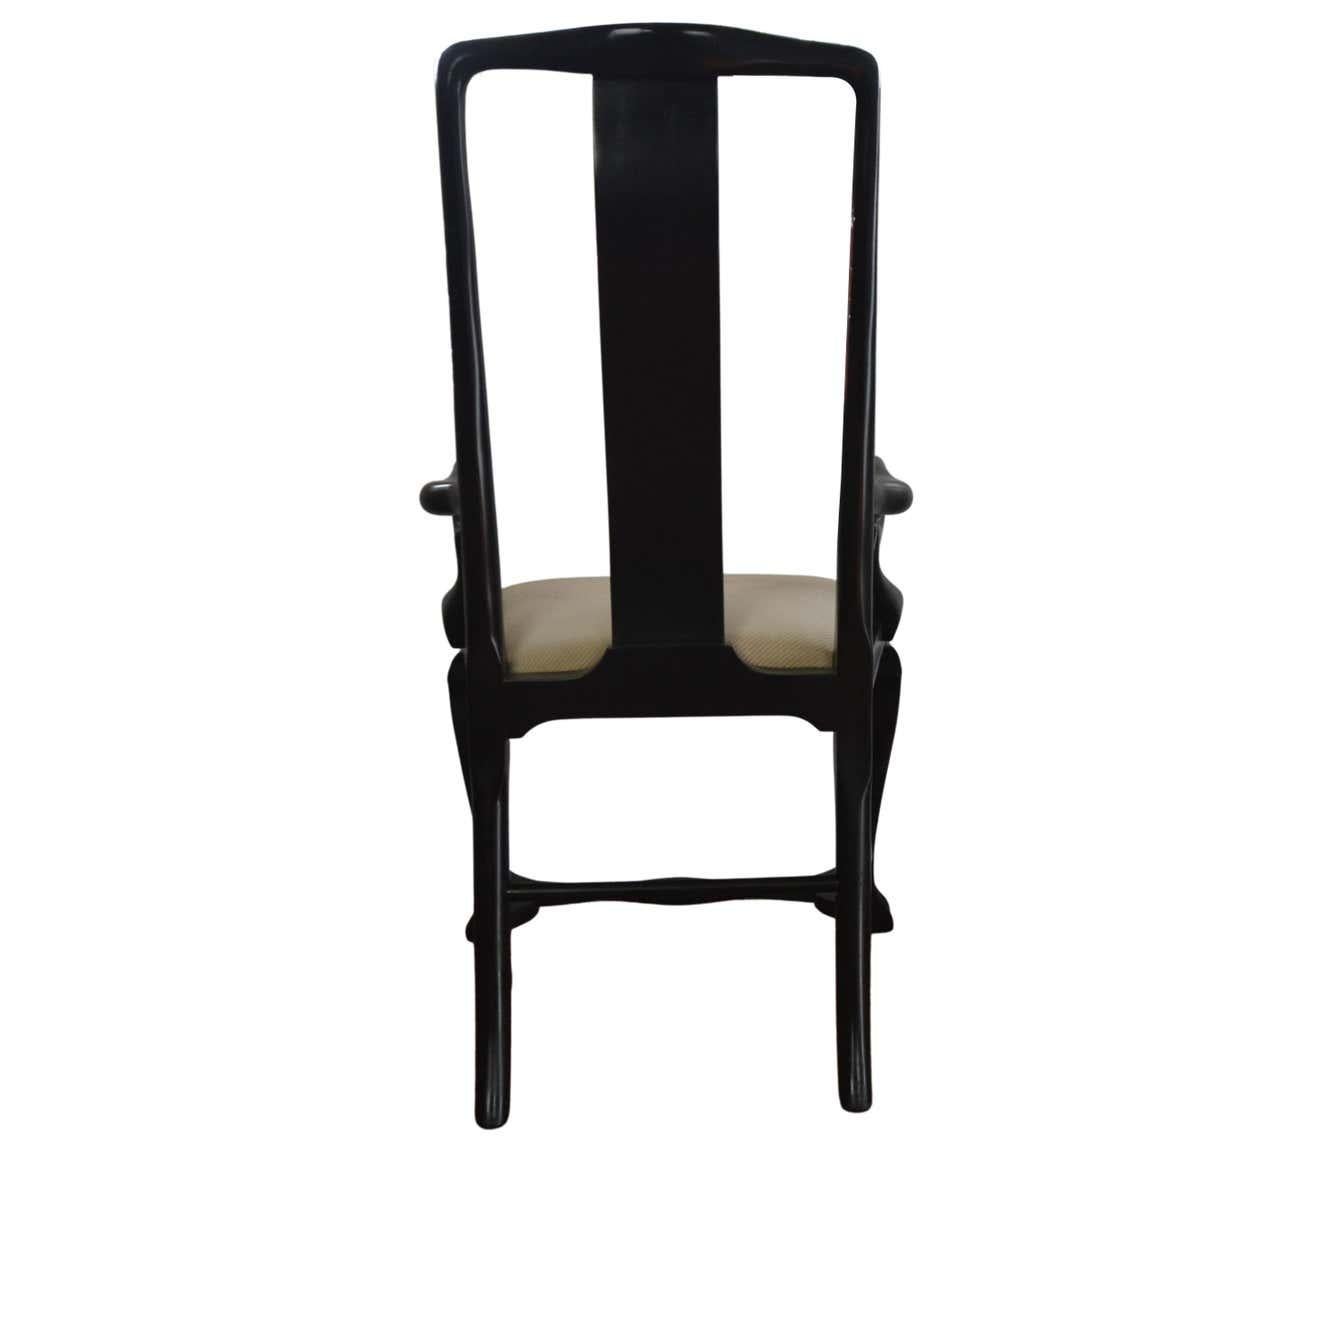 American Set 8 Lacquer Finish Dining Chairs